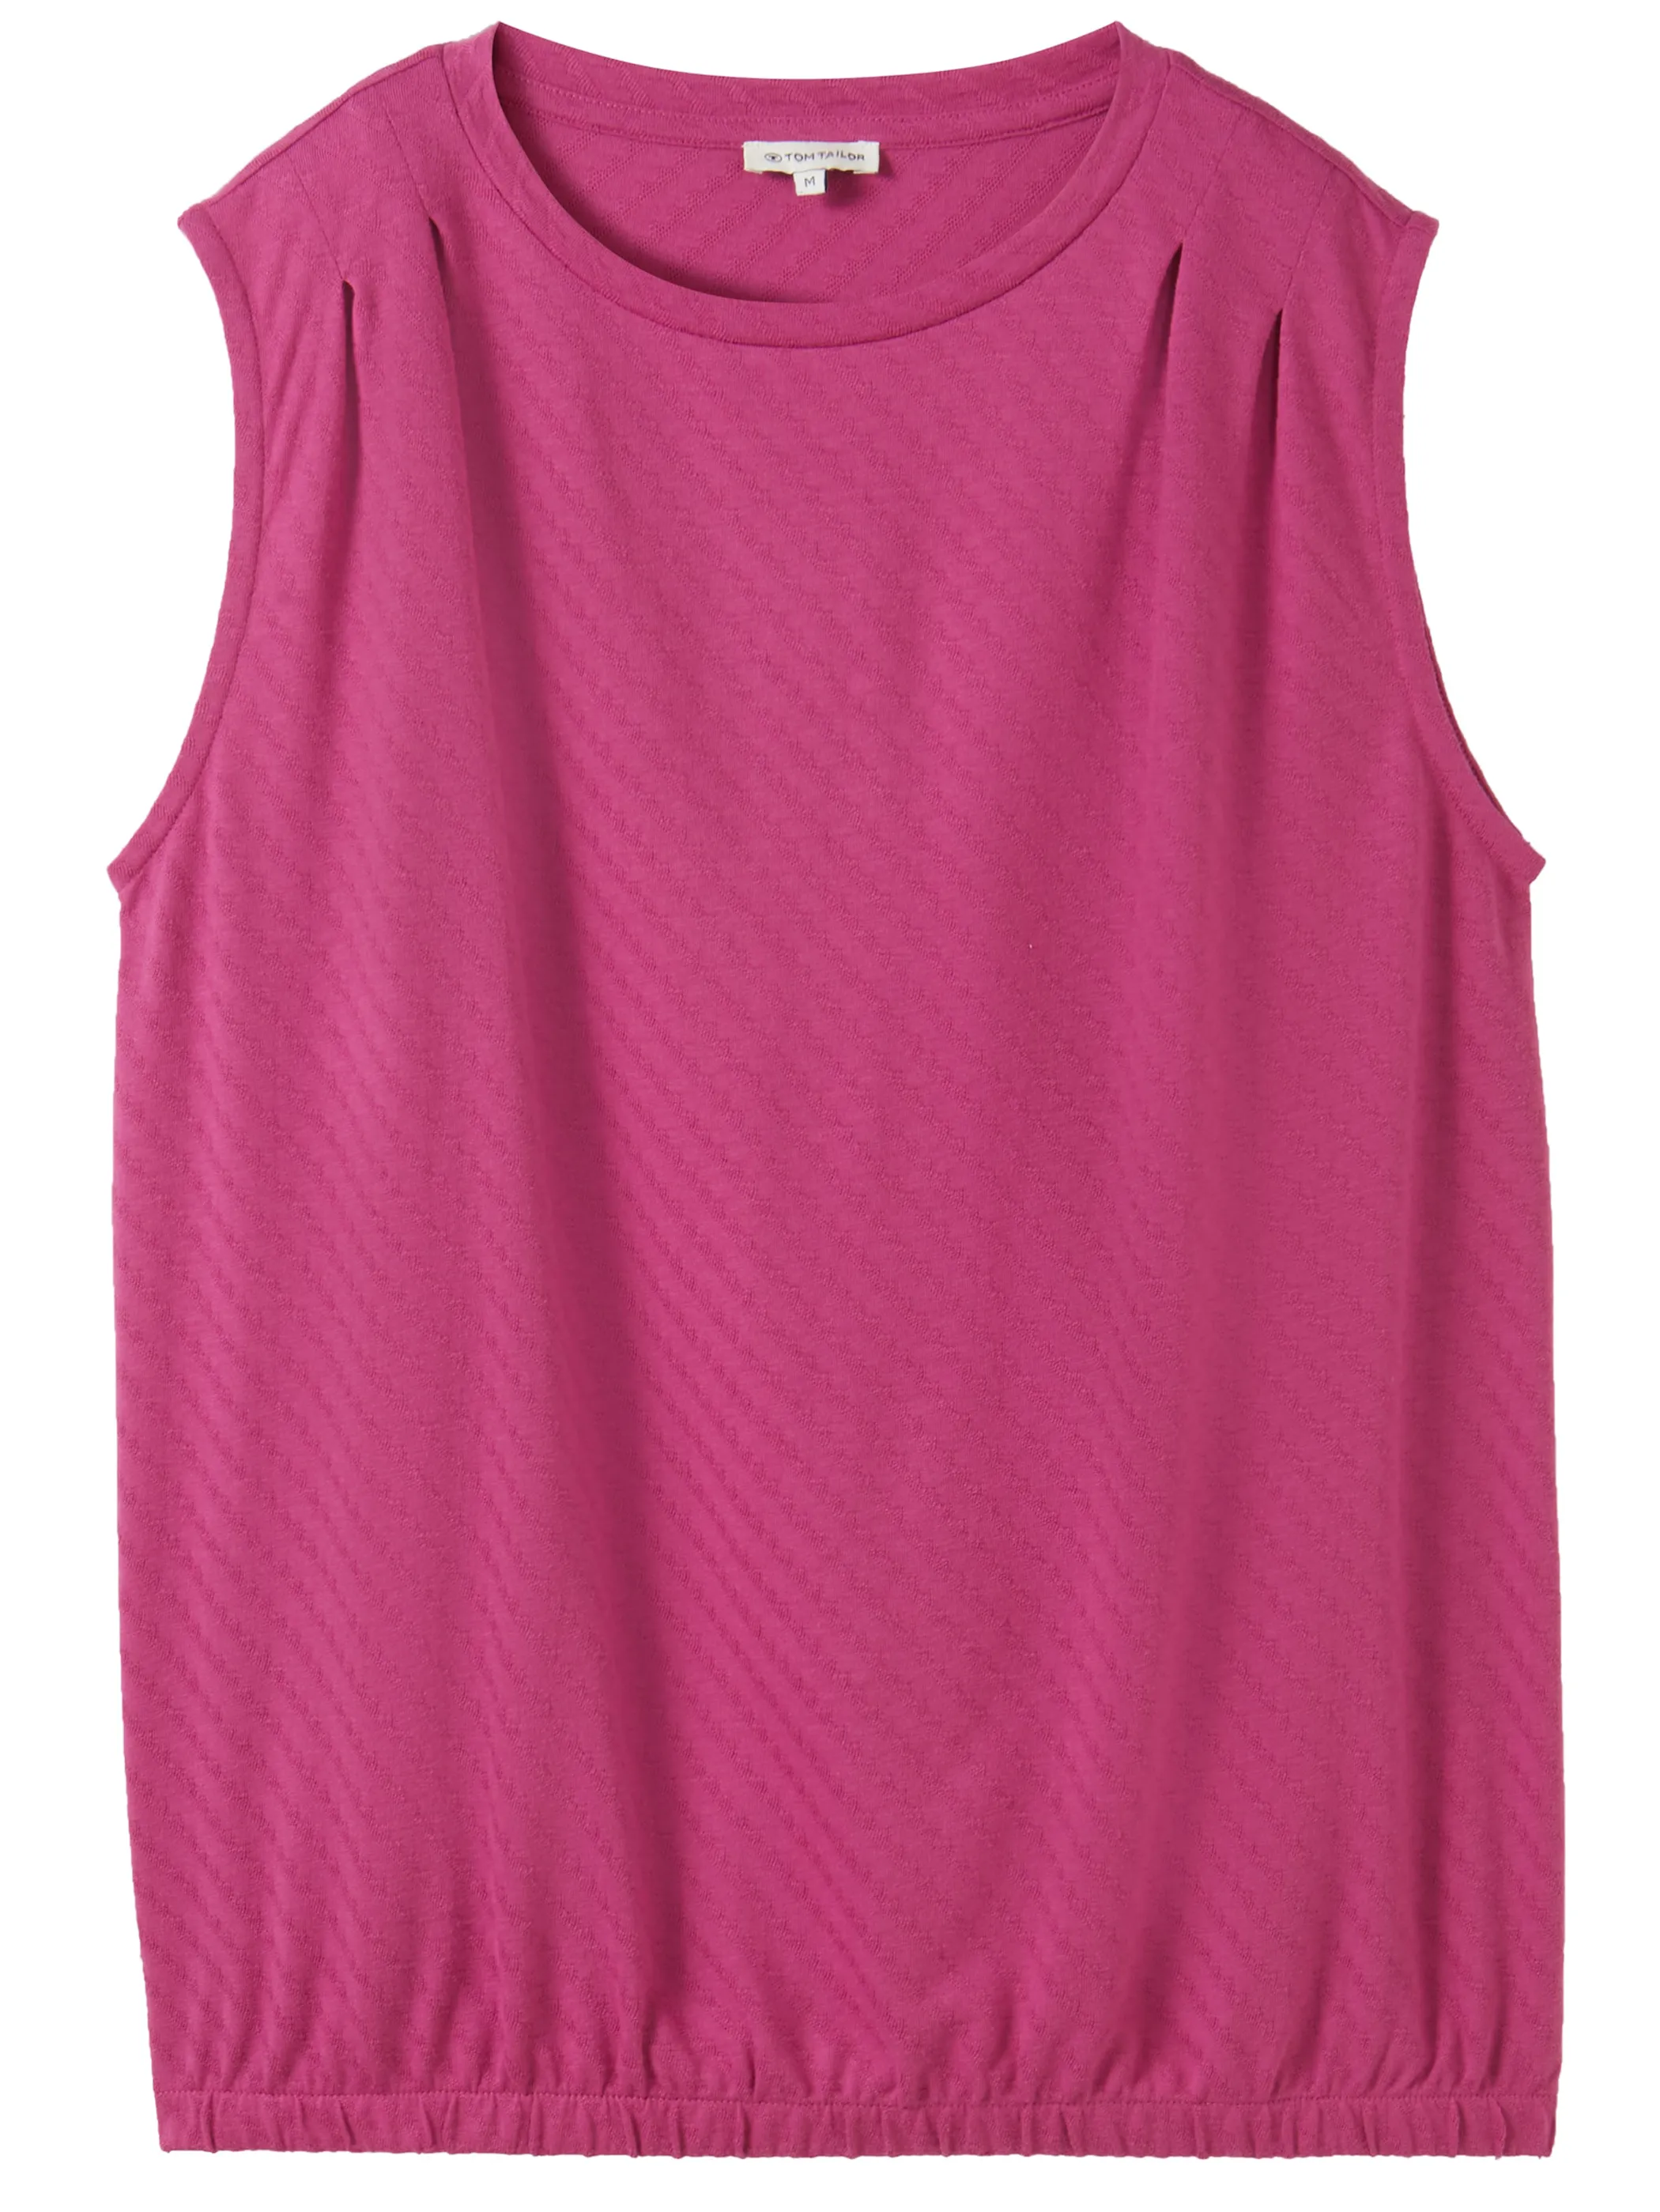 Tom Tailor 1041576 T-shirt top structured Pink 895791 35275 1